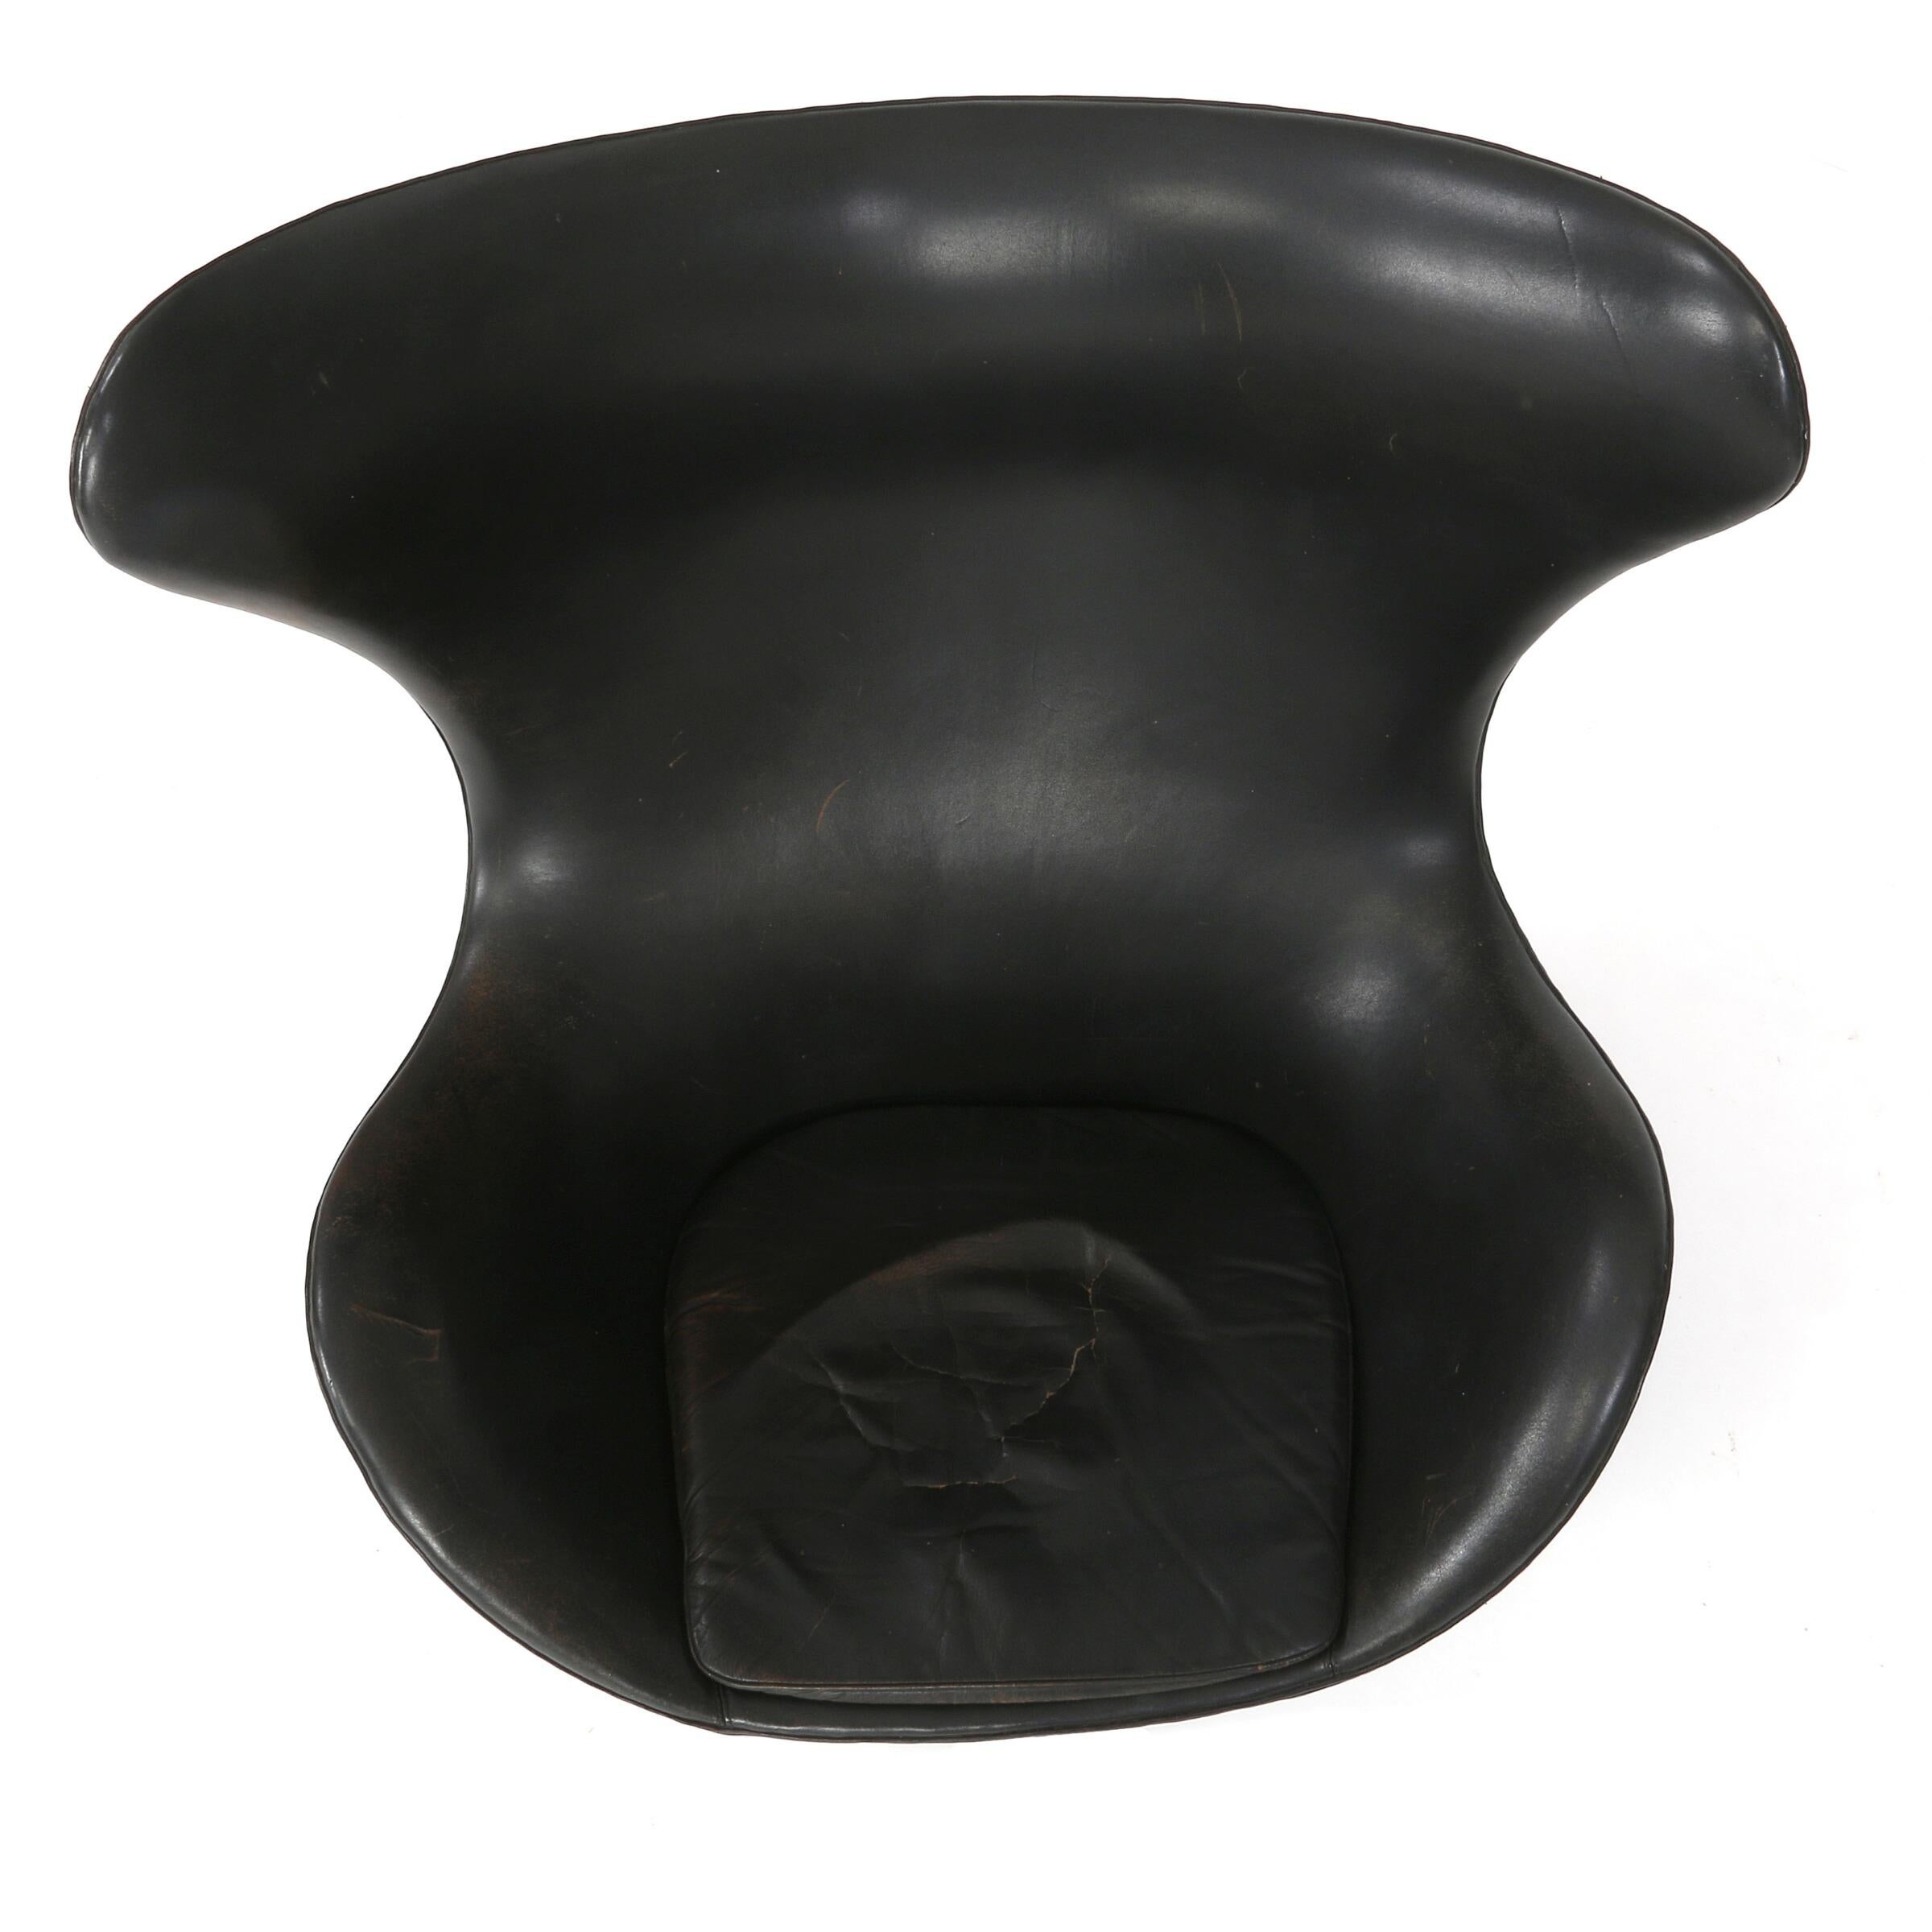 Egg Chair, Arne Jacobsen Early M 3317, Black Leather, Fritz Hansen, 1958 In Good Condition For Sale In Roskilde, Sealand